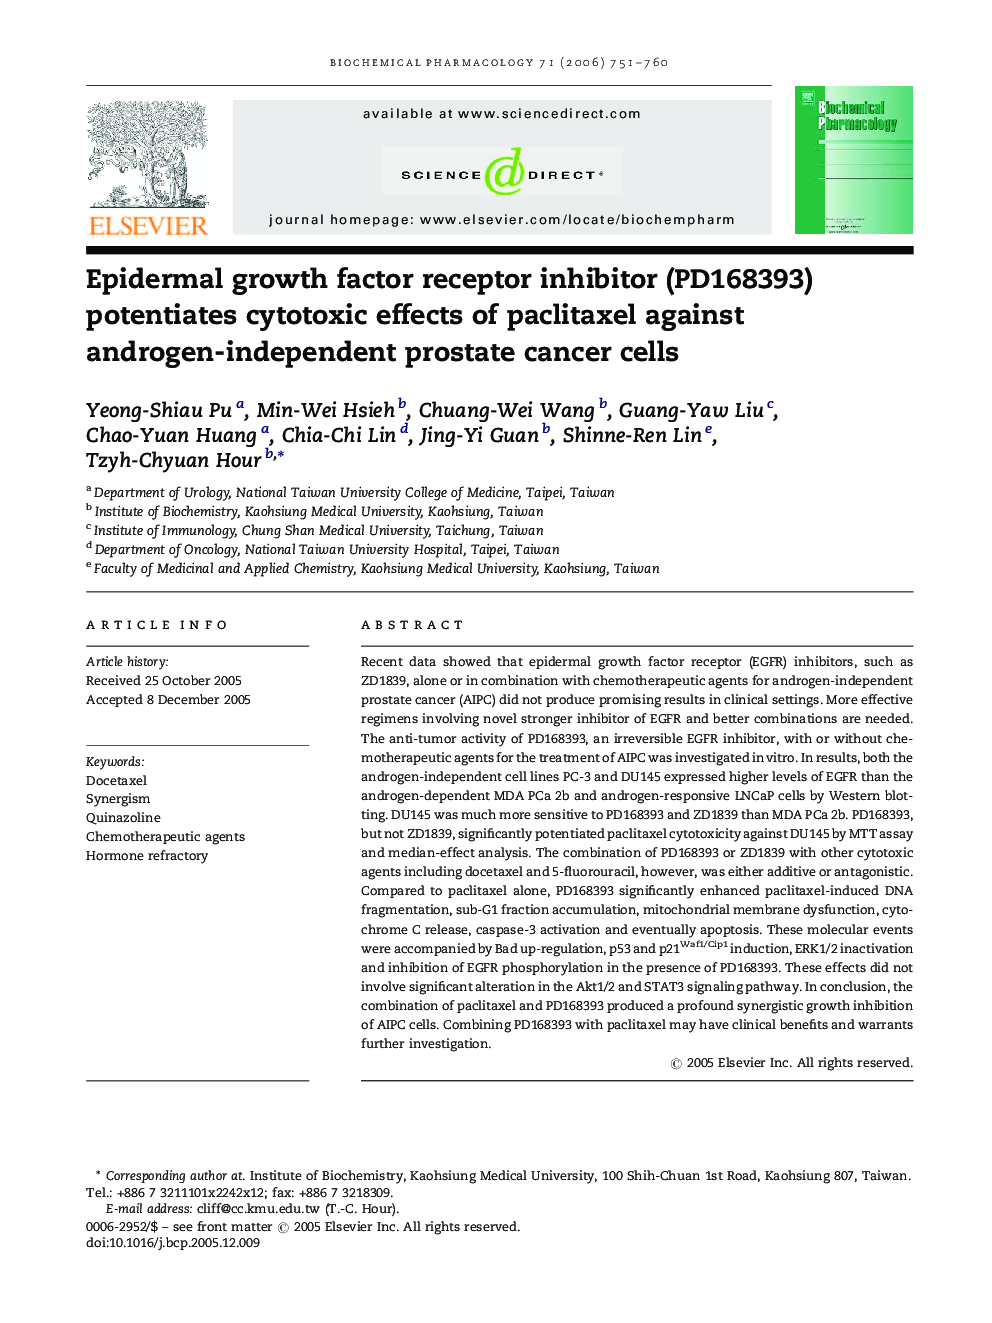 Epidermal growth factor receptor inhibitor (PD168393) potentiates cytotoxic effects of paclitaxel against androgen-independent prostate cancer cells